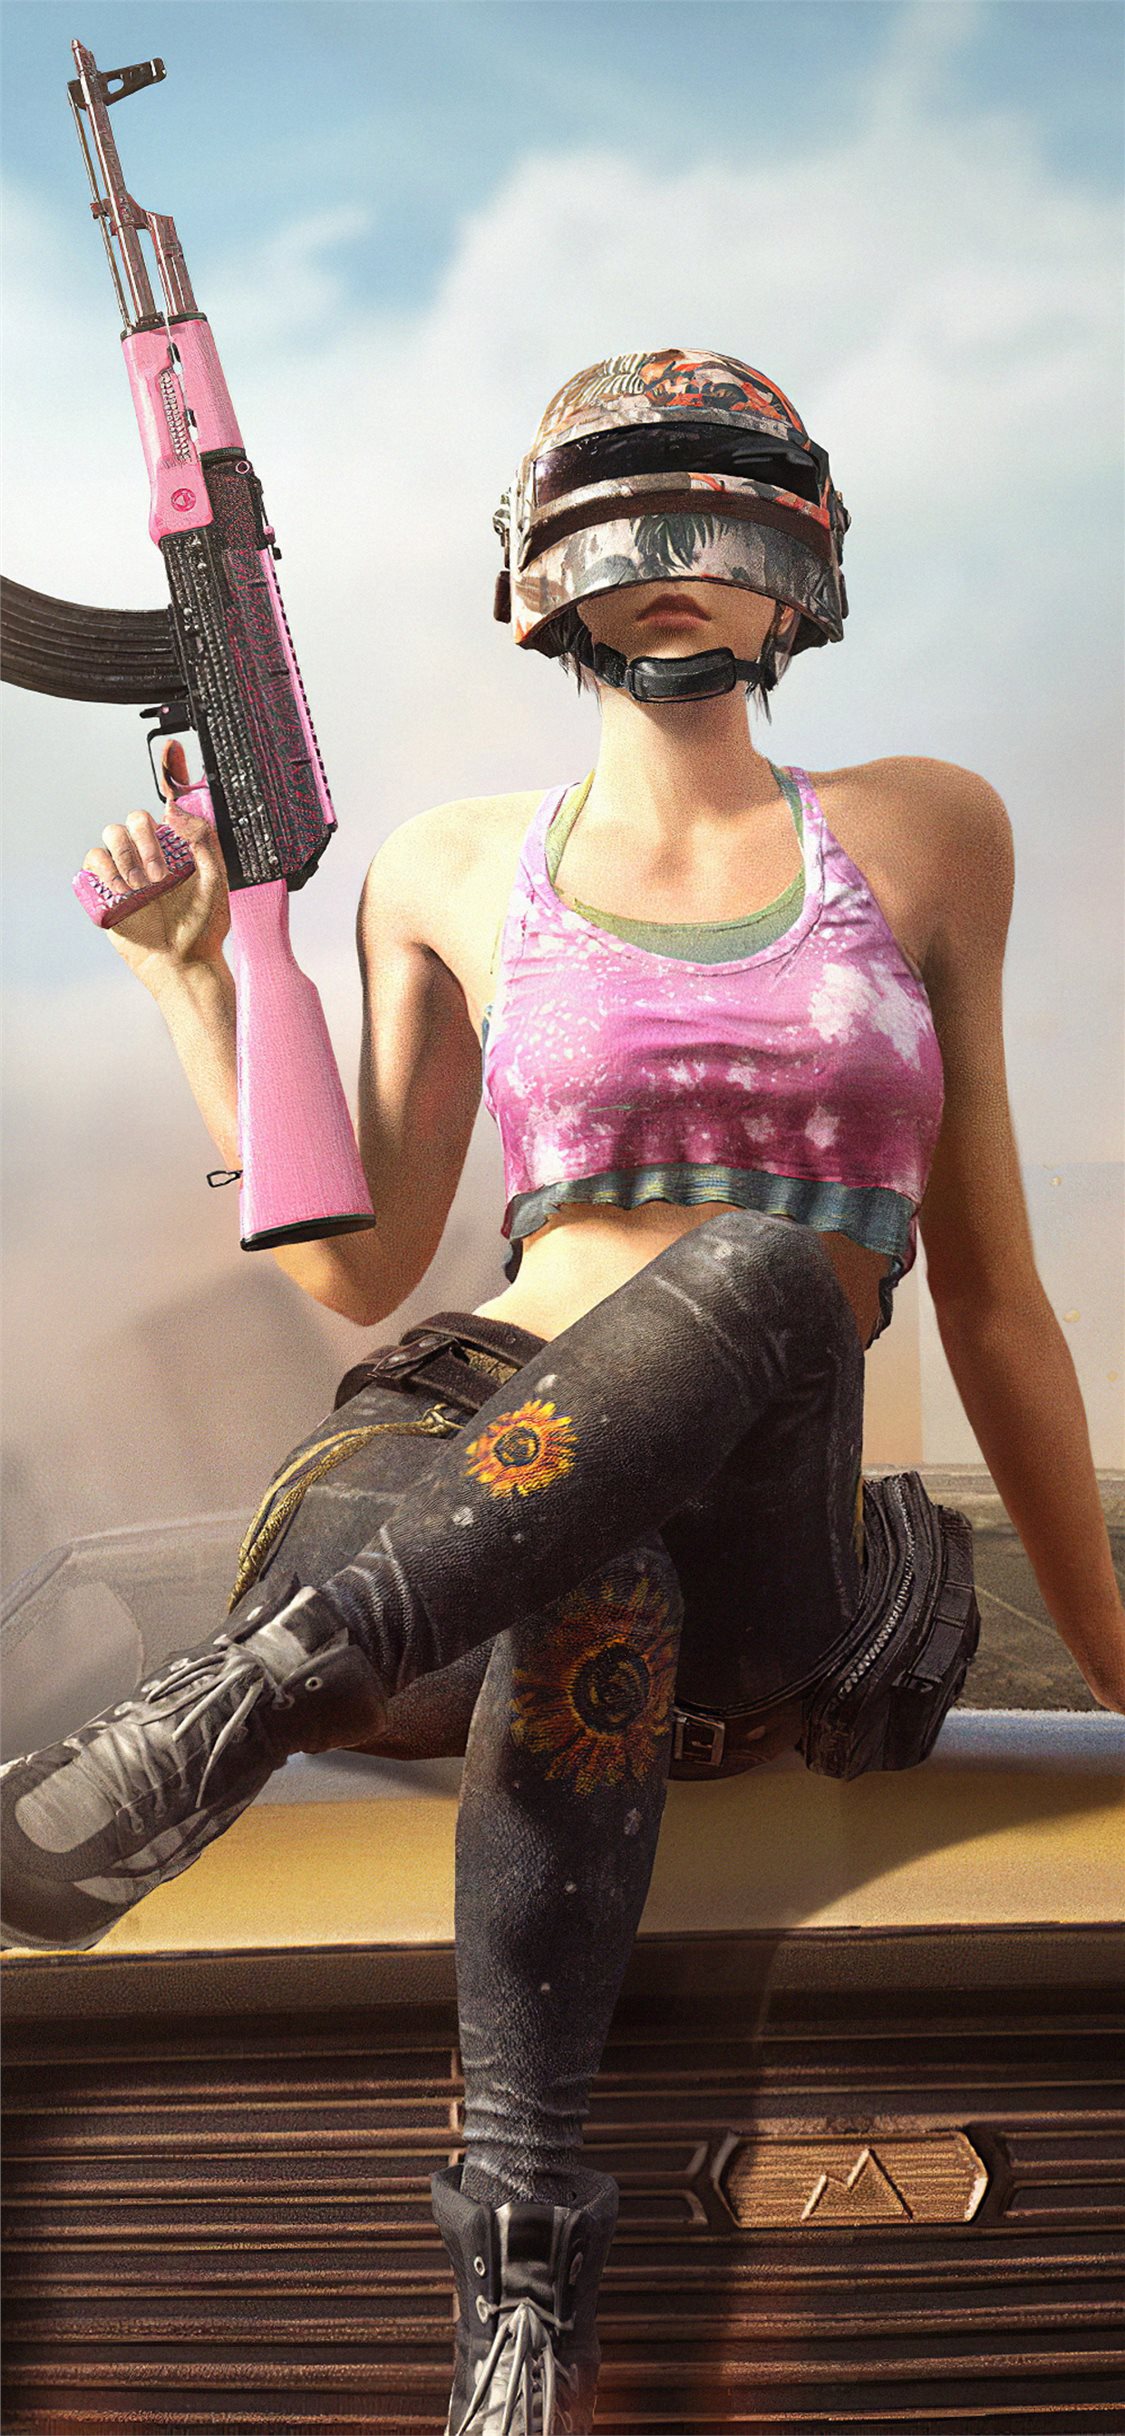 Pubg Girl With Gun 4k 19 Iphone X Wallpapers Free Download